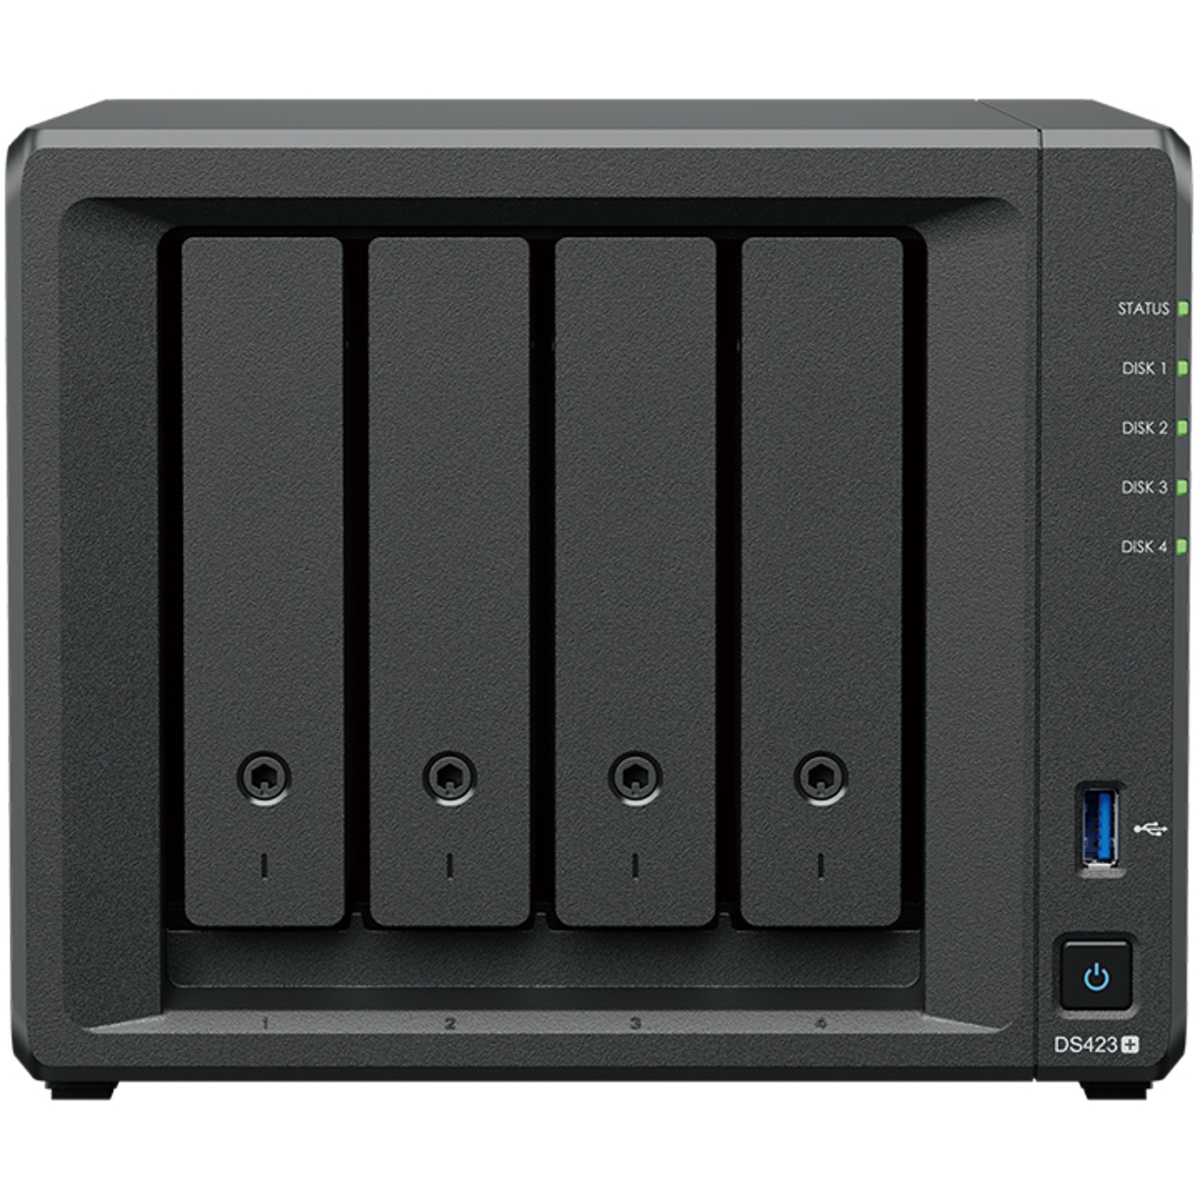 Synology DiskStation DS423+ 96tb 4-Bay Desktop Multimedia / Power User / Business NAS - Network Attached Storage Device 4x24tb Western Digital Ultrastar HC580 WUH722424ALE6L4 3.5 7200rpm SATA 6Gb/s HDD ENTERPRISE Class Drives Installed - Burn-In Tested - FREE RAM UPGRADE DiskStation DS423+